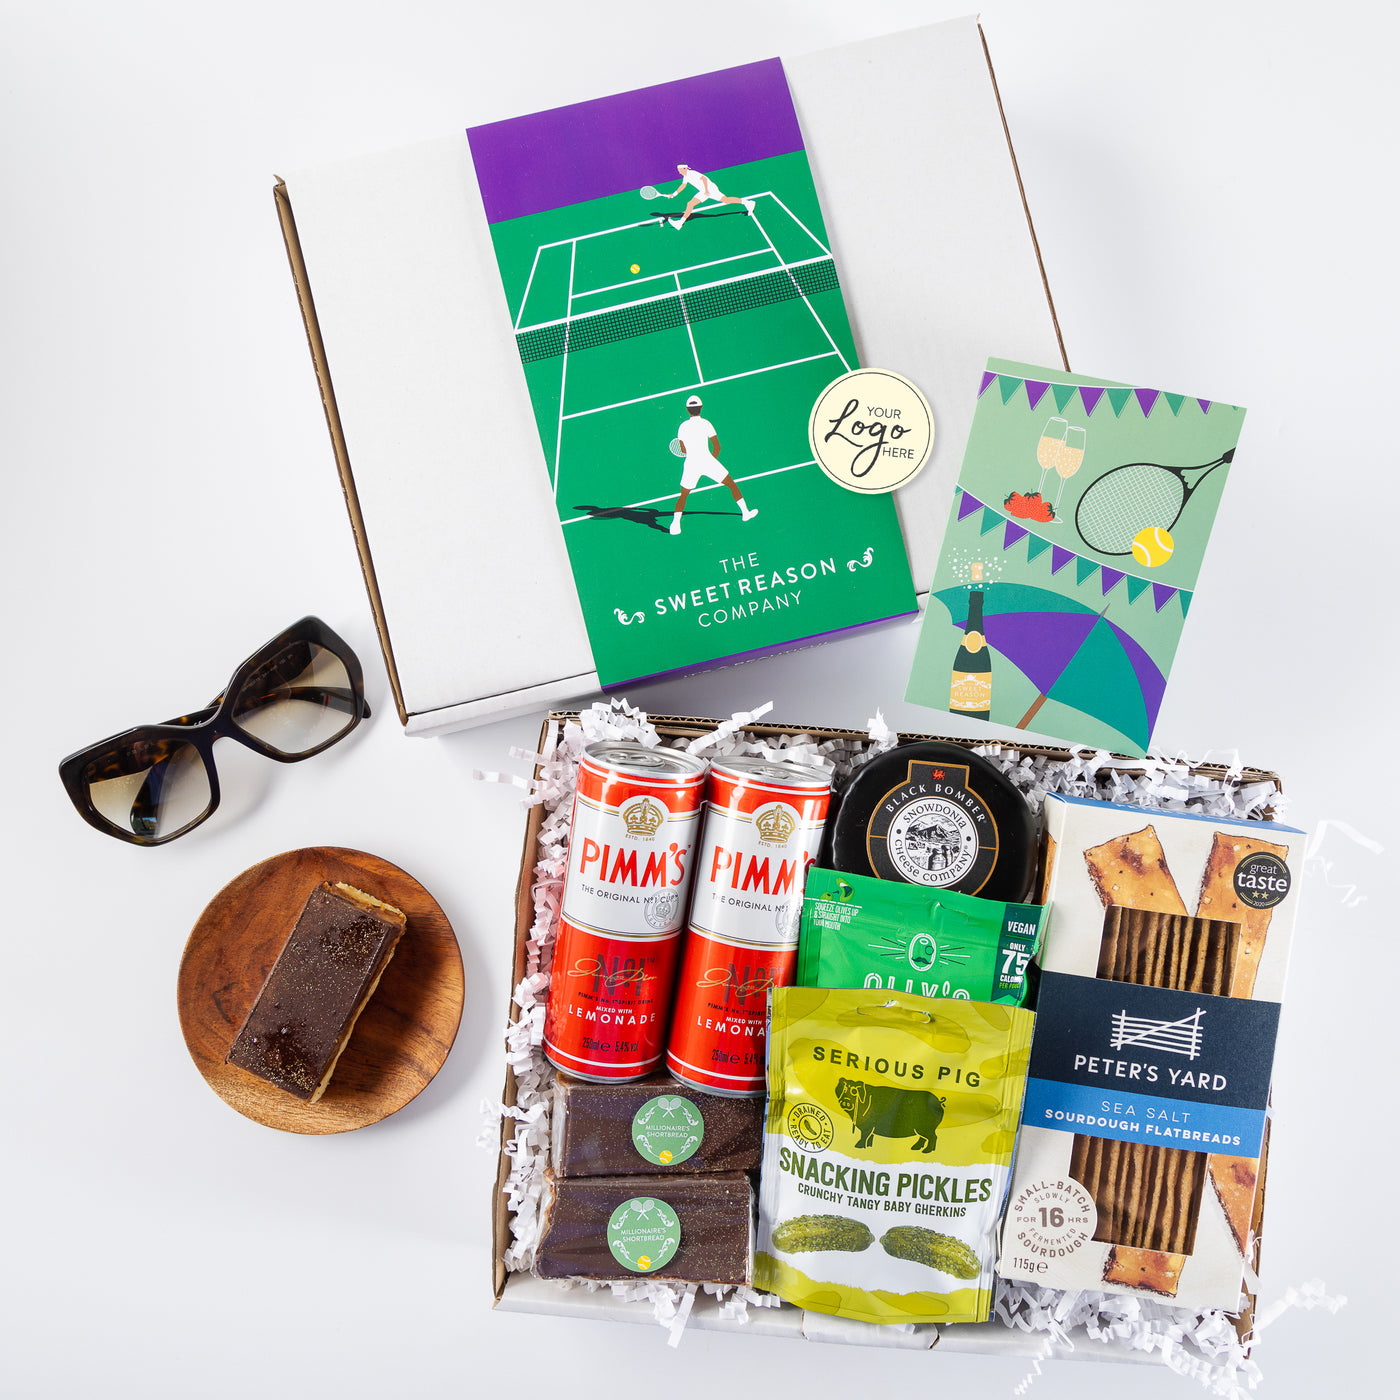 Branded & personalised 'Wimbledon' Savoury Indulgent Treats, Shortbread and Pimm's